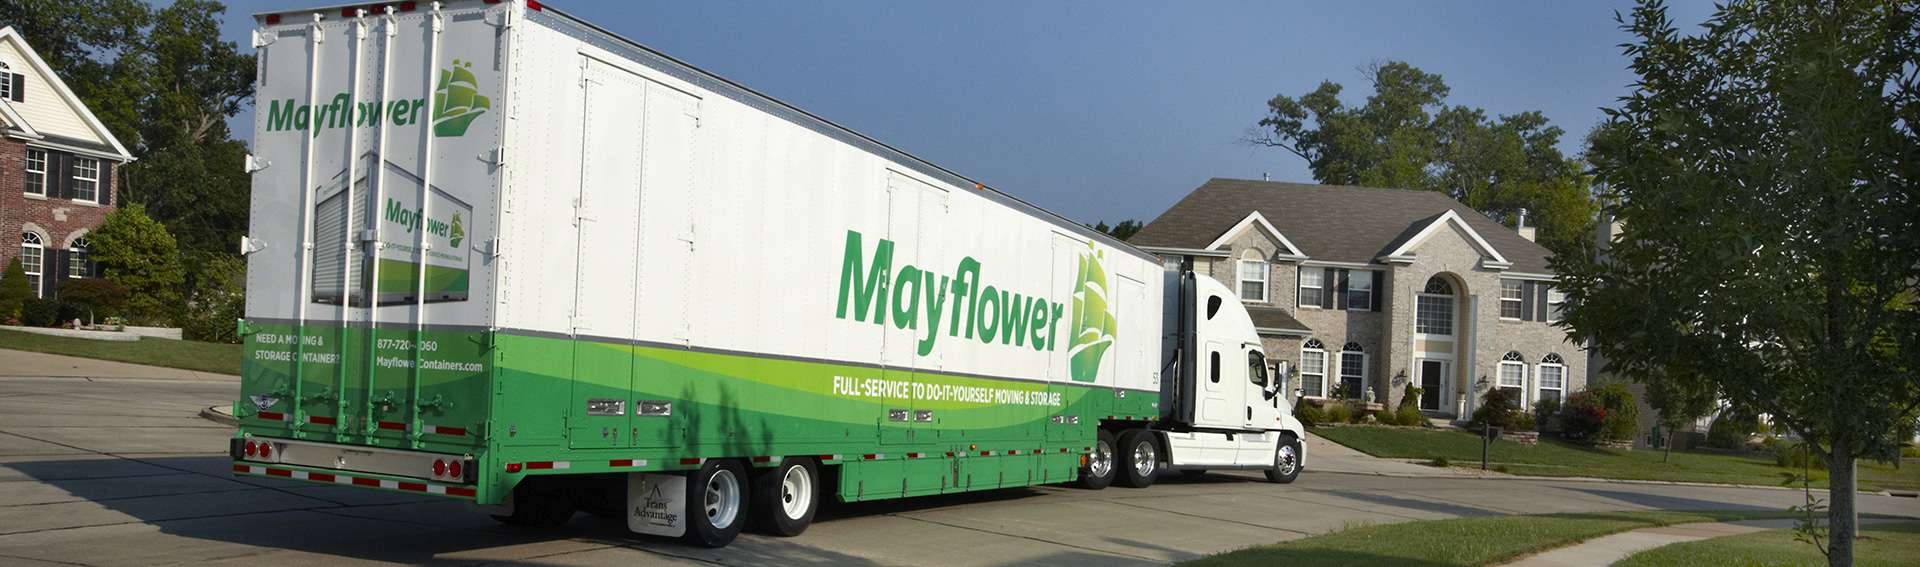 st charles movers